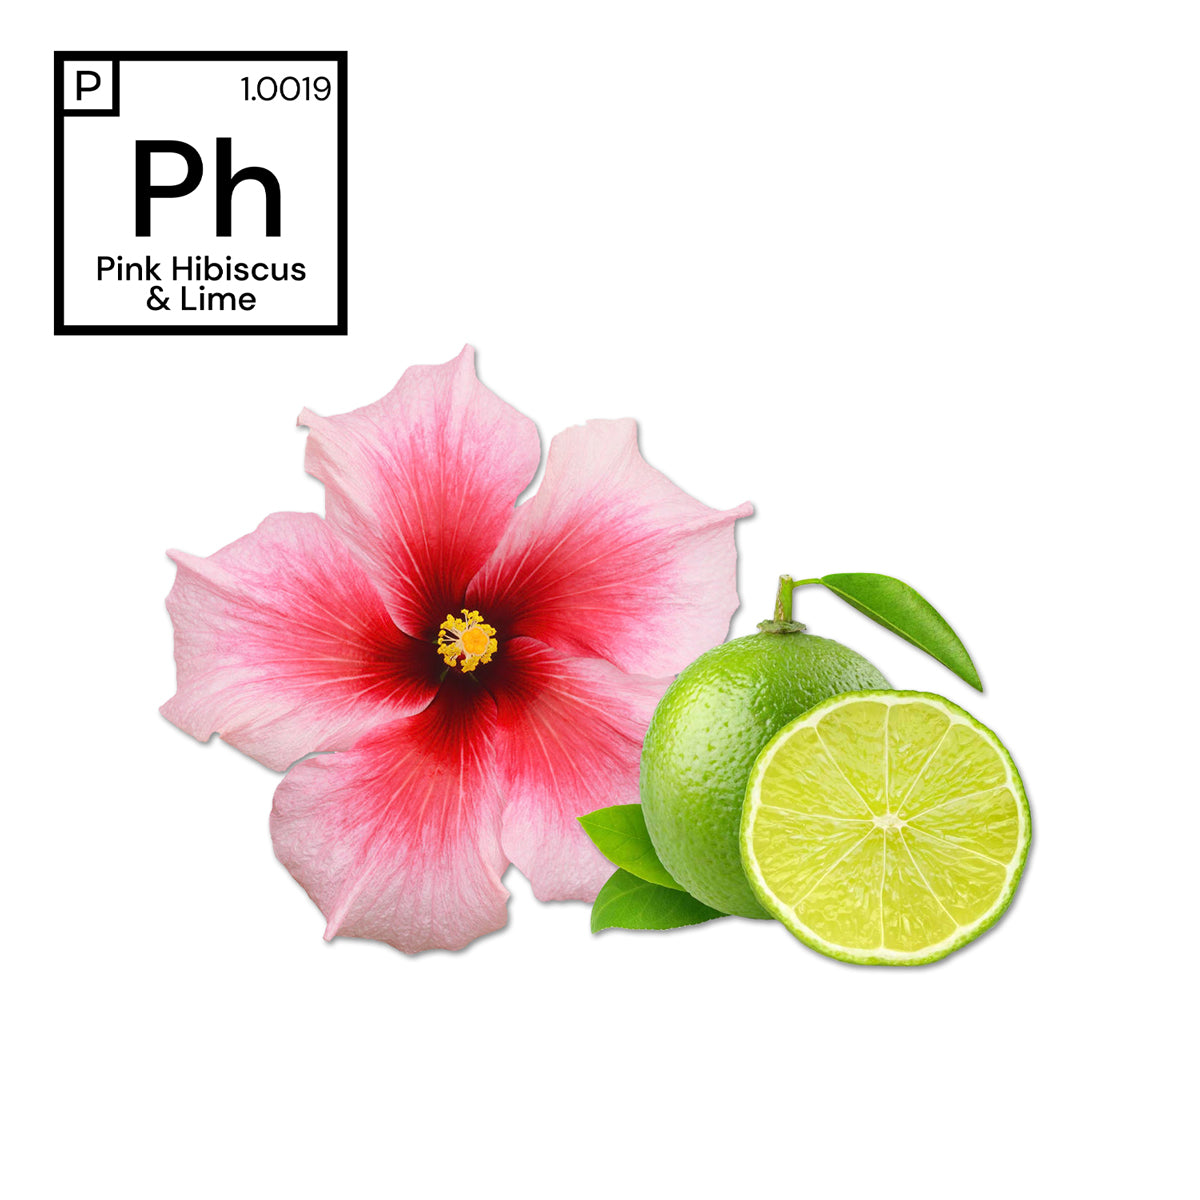 Pink Hibiscus & Lime Fragrance #1.0019